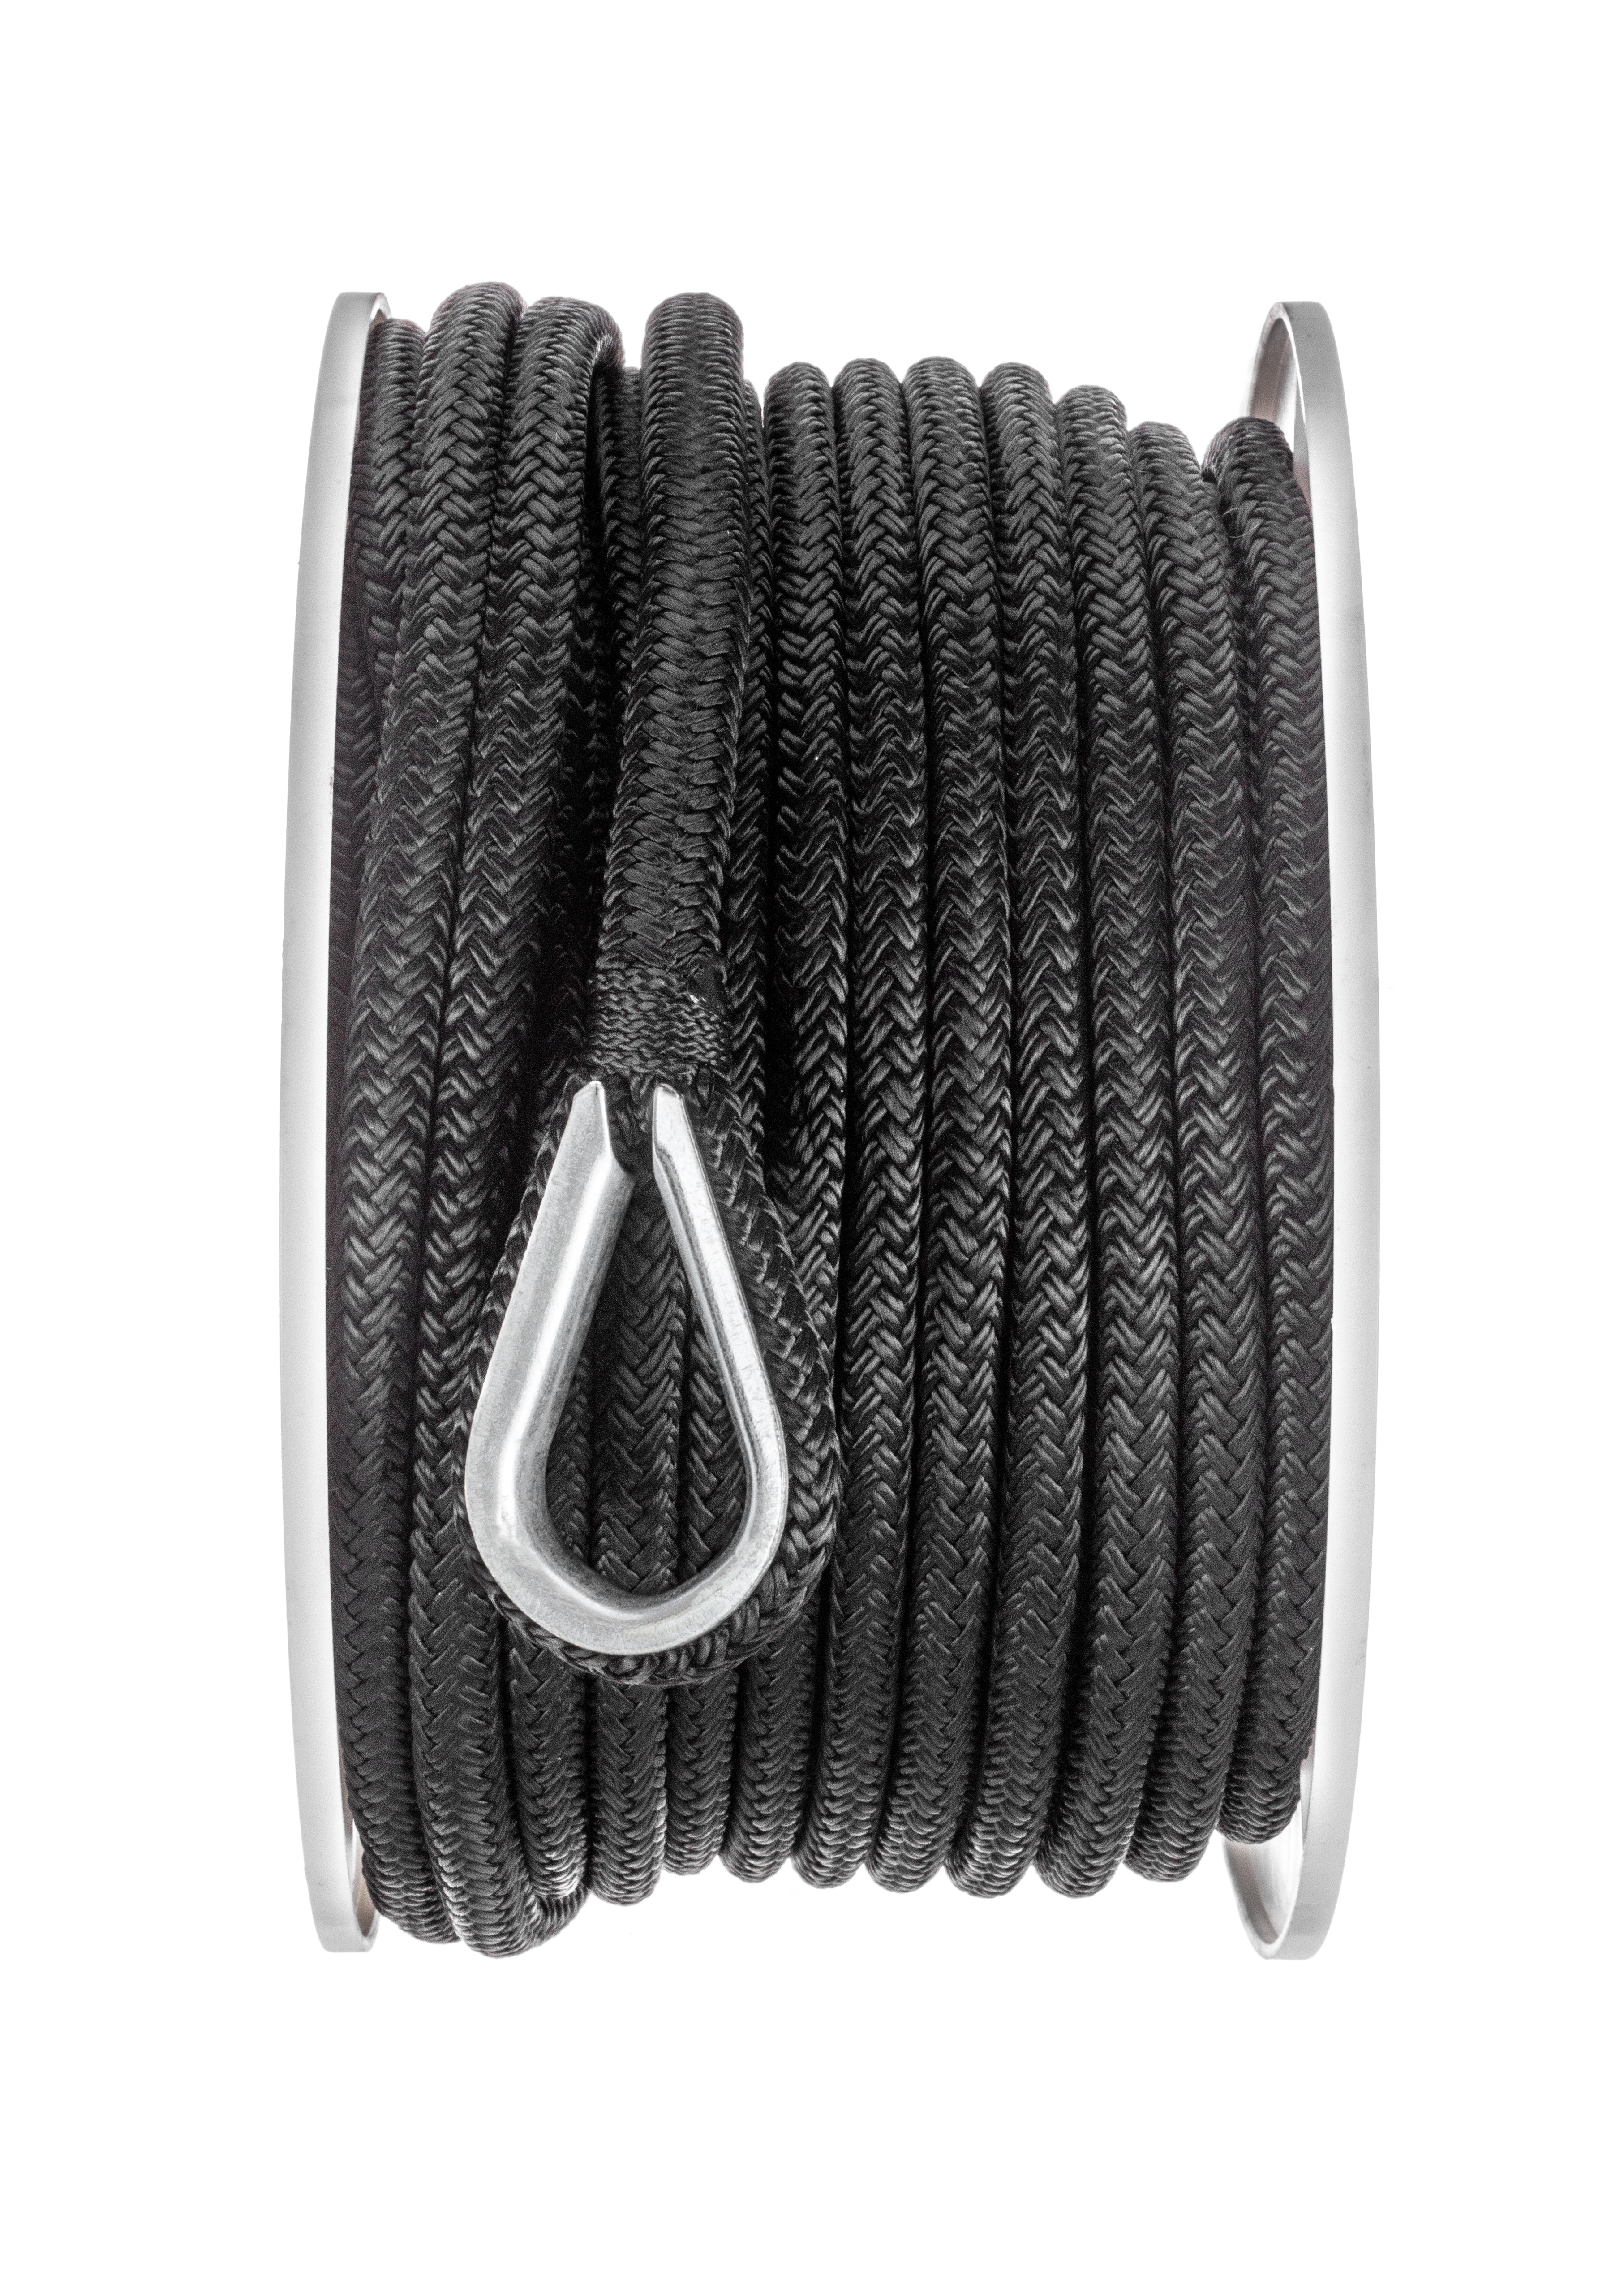 NovelBee 1//2 inch Double Braid Nylon Rope with 1//4 Inch x 15 Feet Galvanized Chain for Boat Anchor Rope and Dock Line